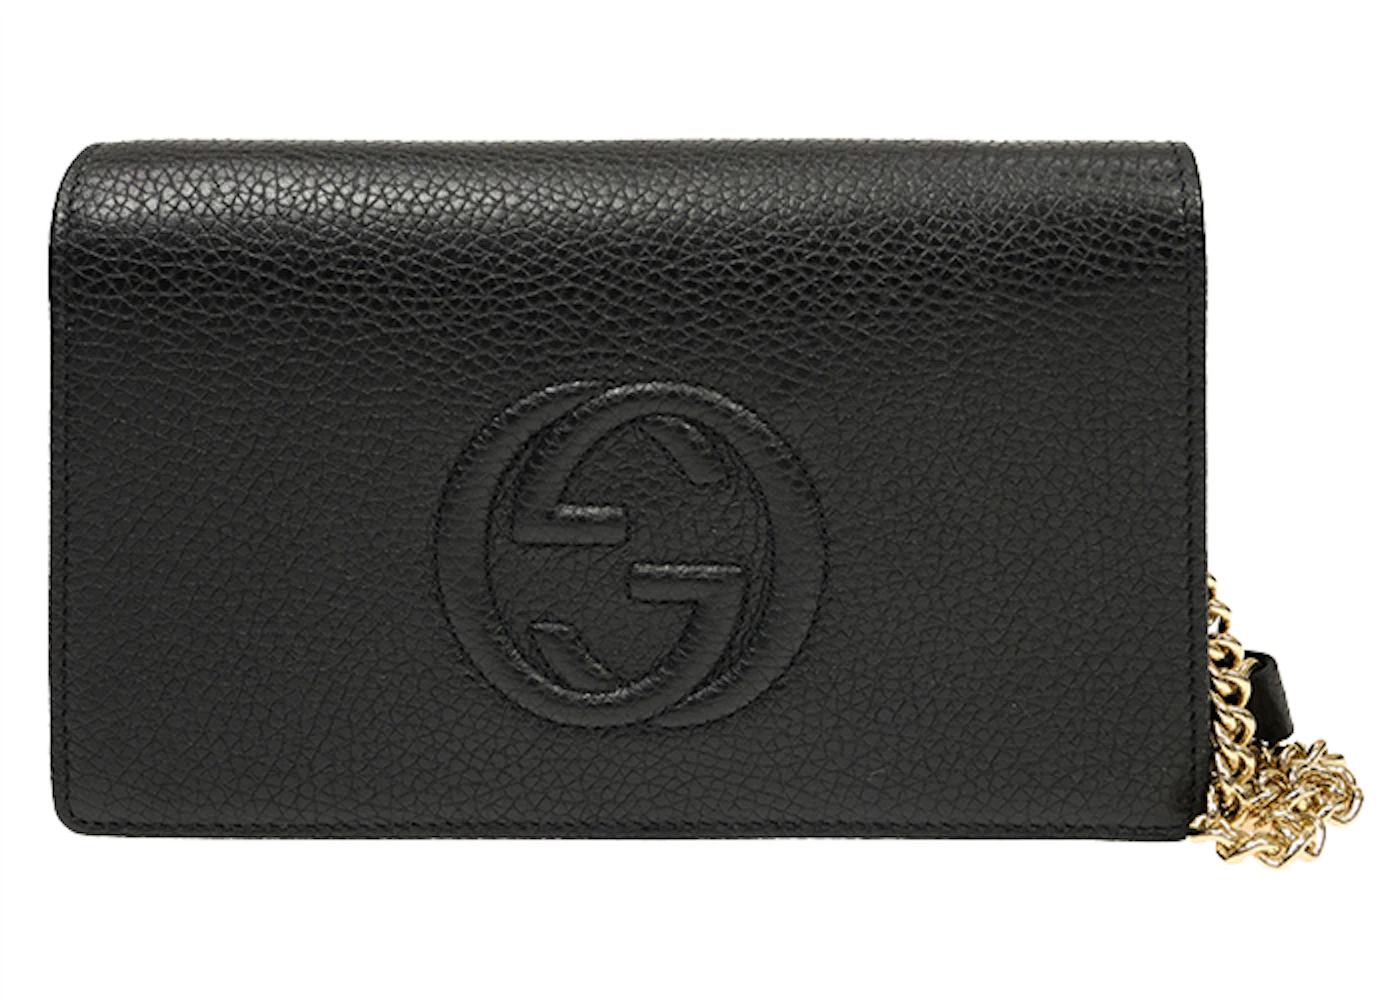 Gucci Soho Chain Wallet Bag Black in Calfskin Leather with Gold-tone - US